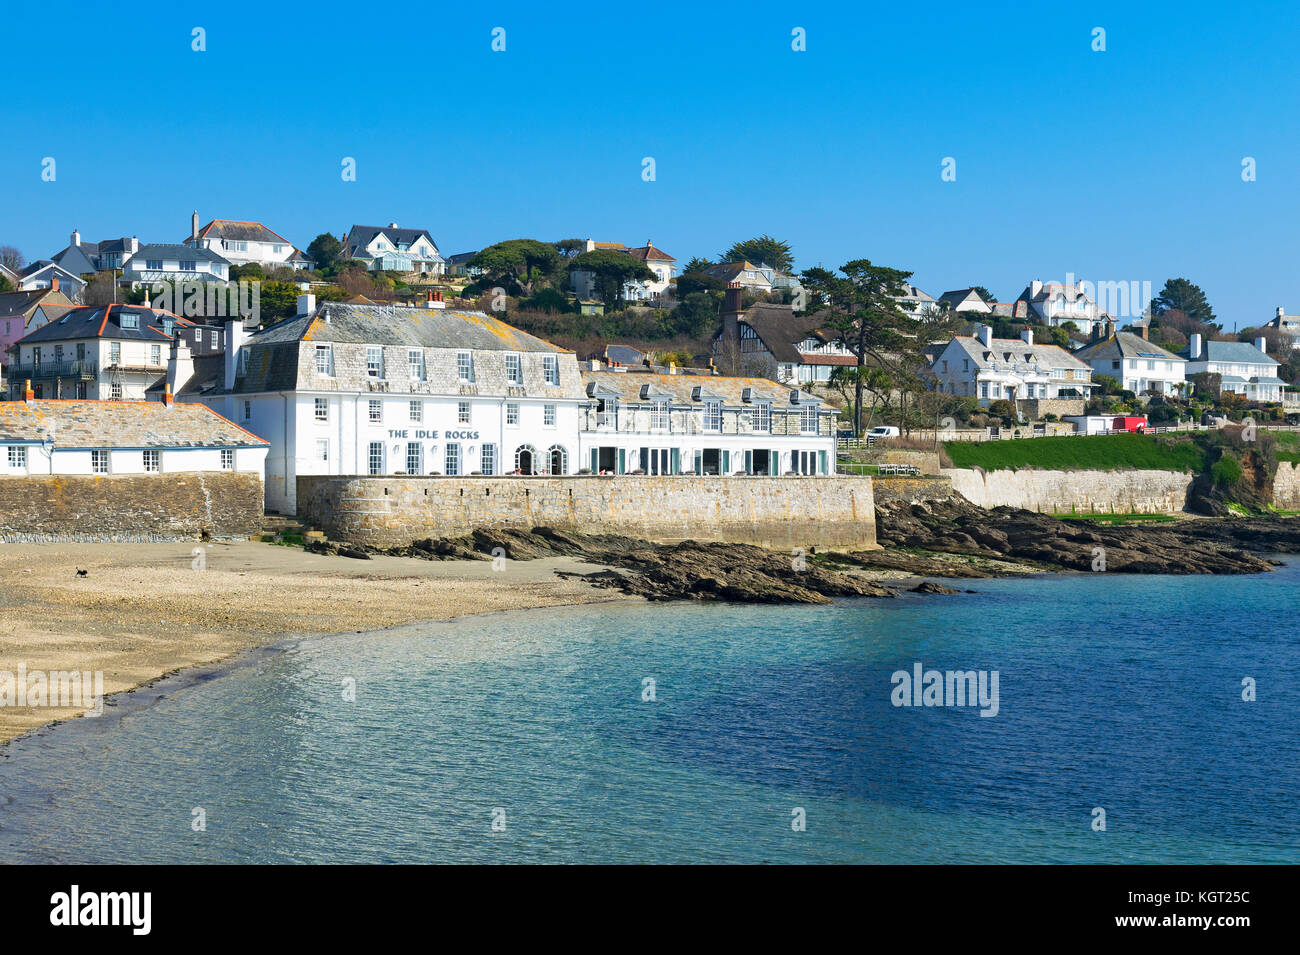 the idle rocks hotel and homes overlooking the bay at st.mawes in cornwall, england, britain, uk. Stock Photo